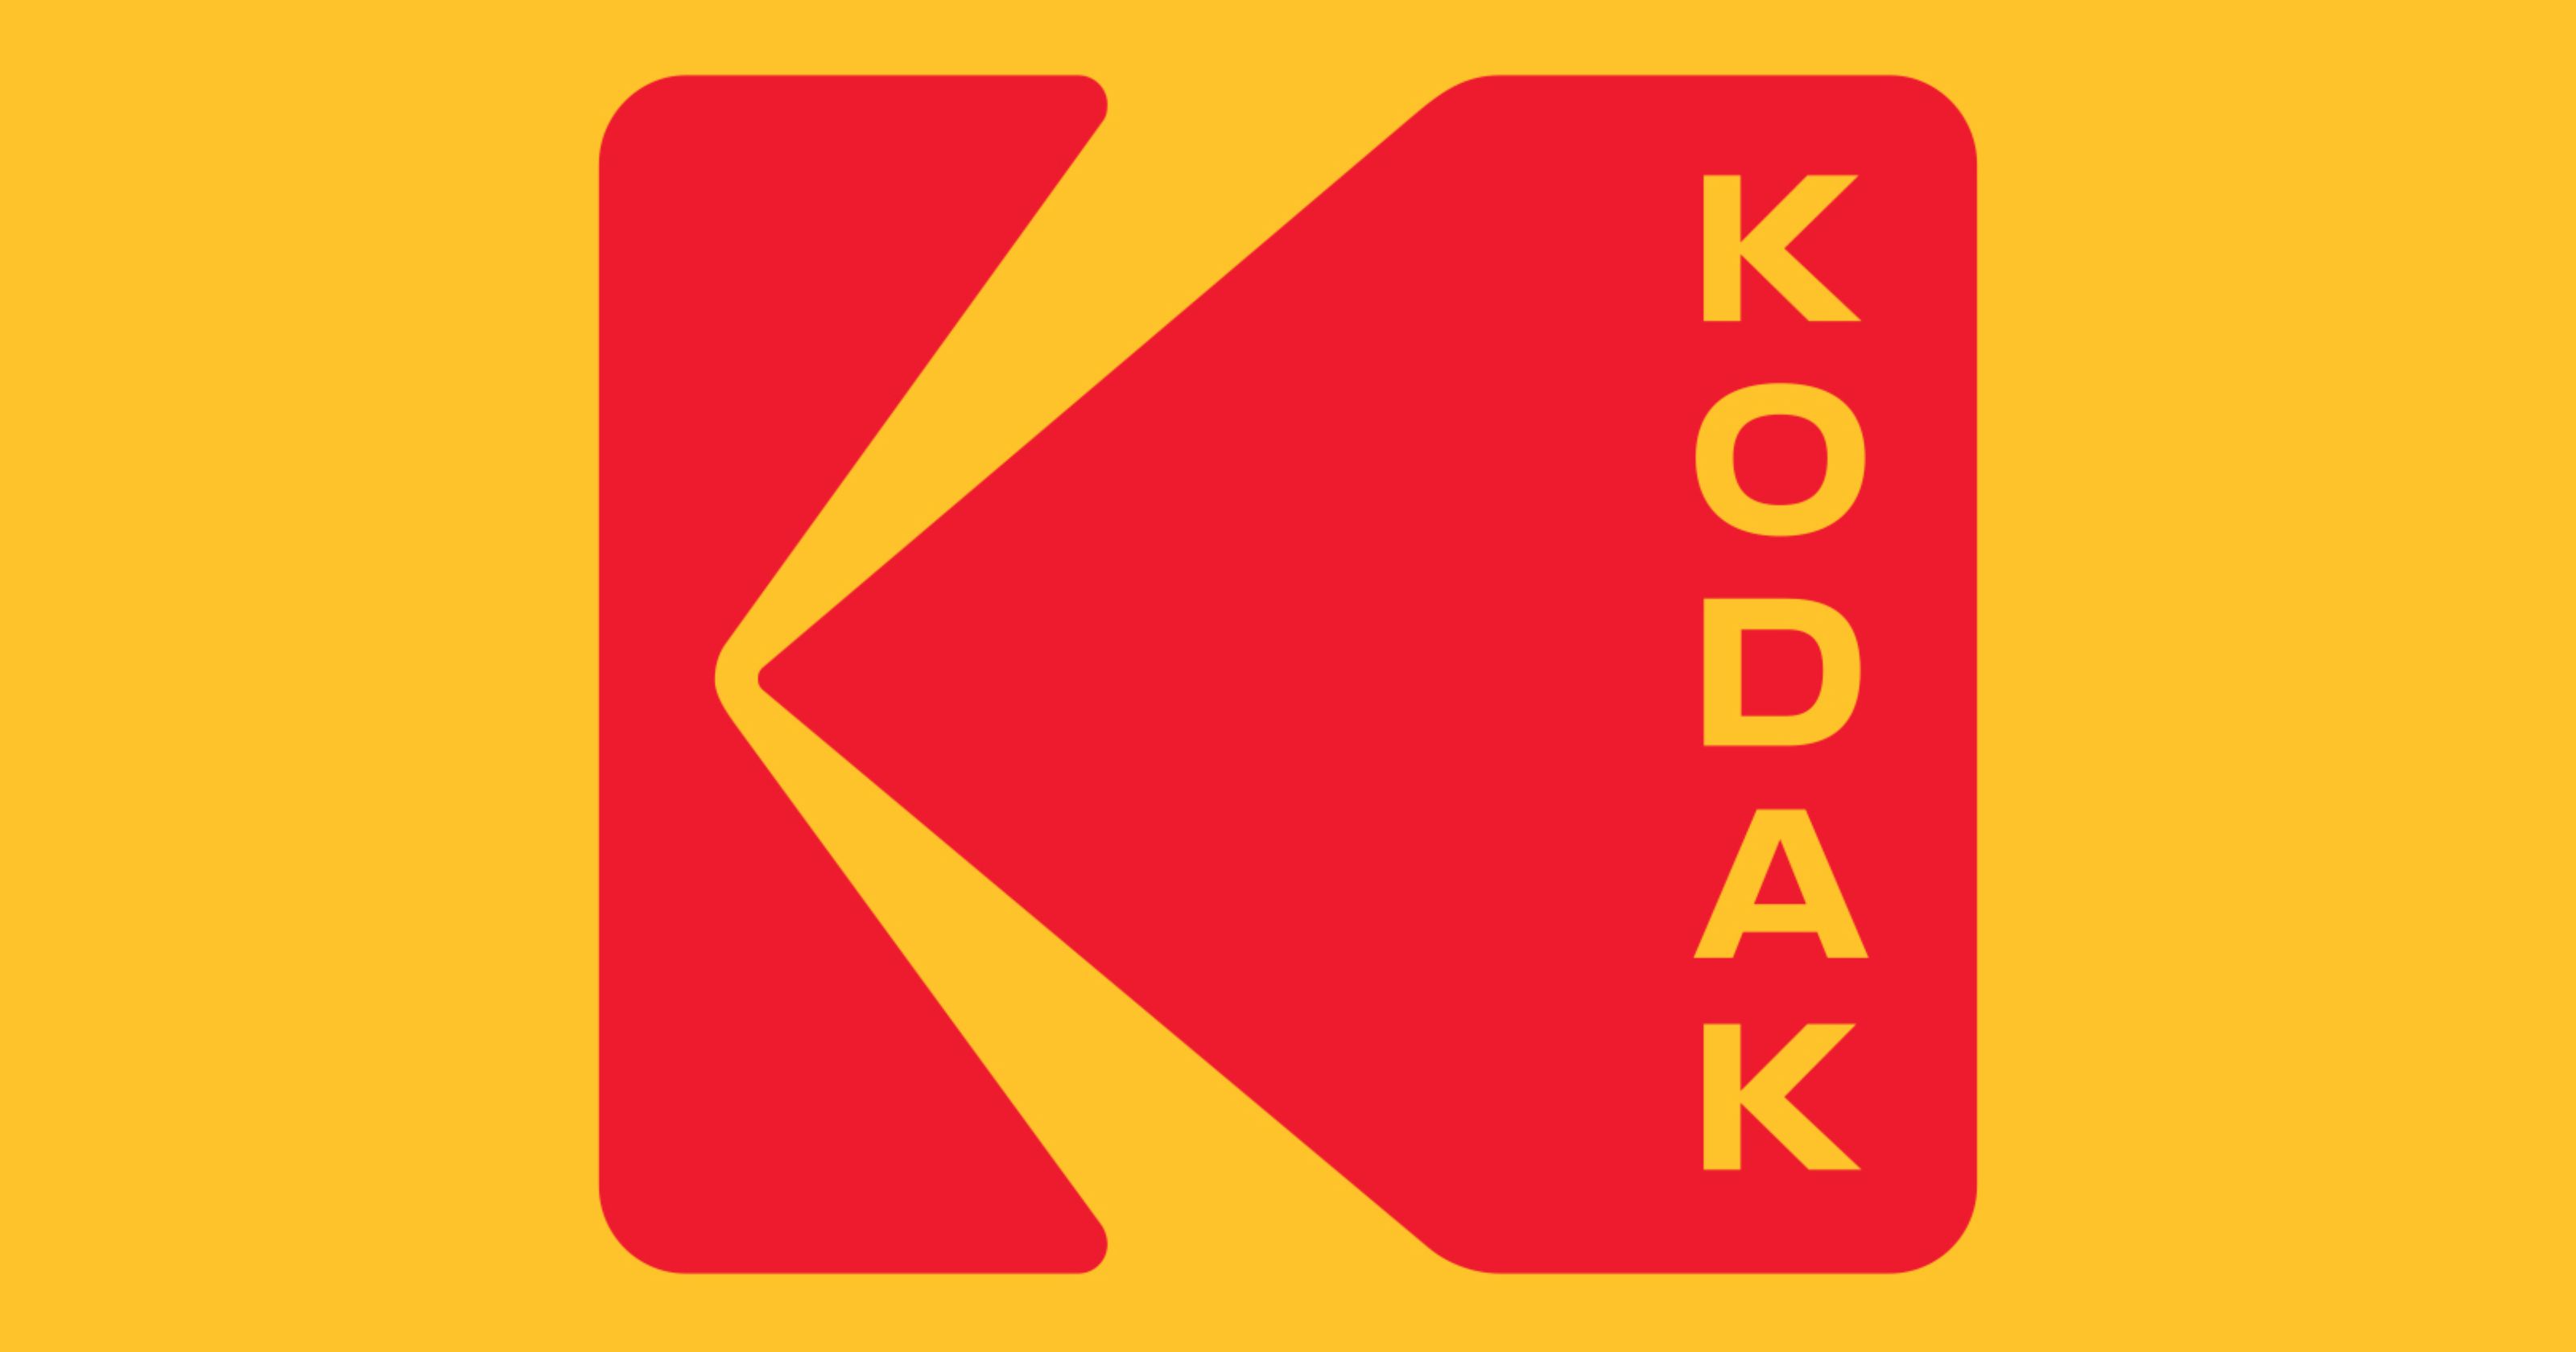 Kodak plans to lay off 100 workers in Rochester, 425 companywide